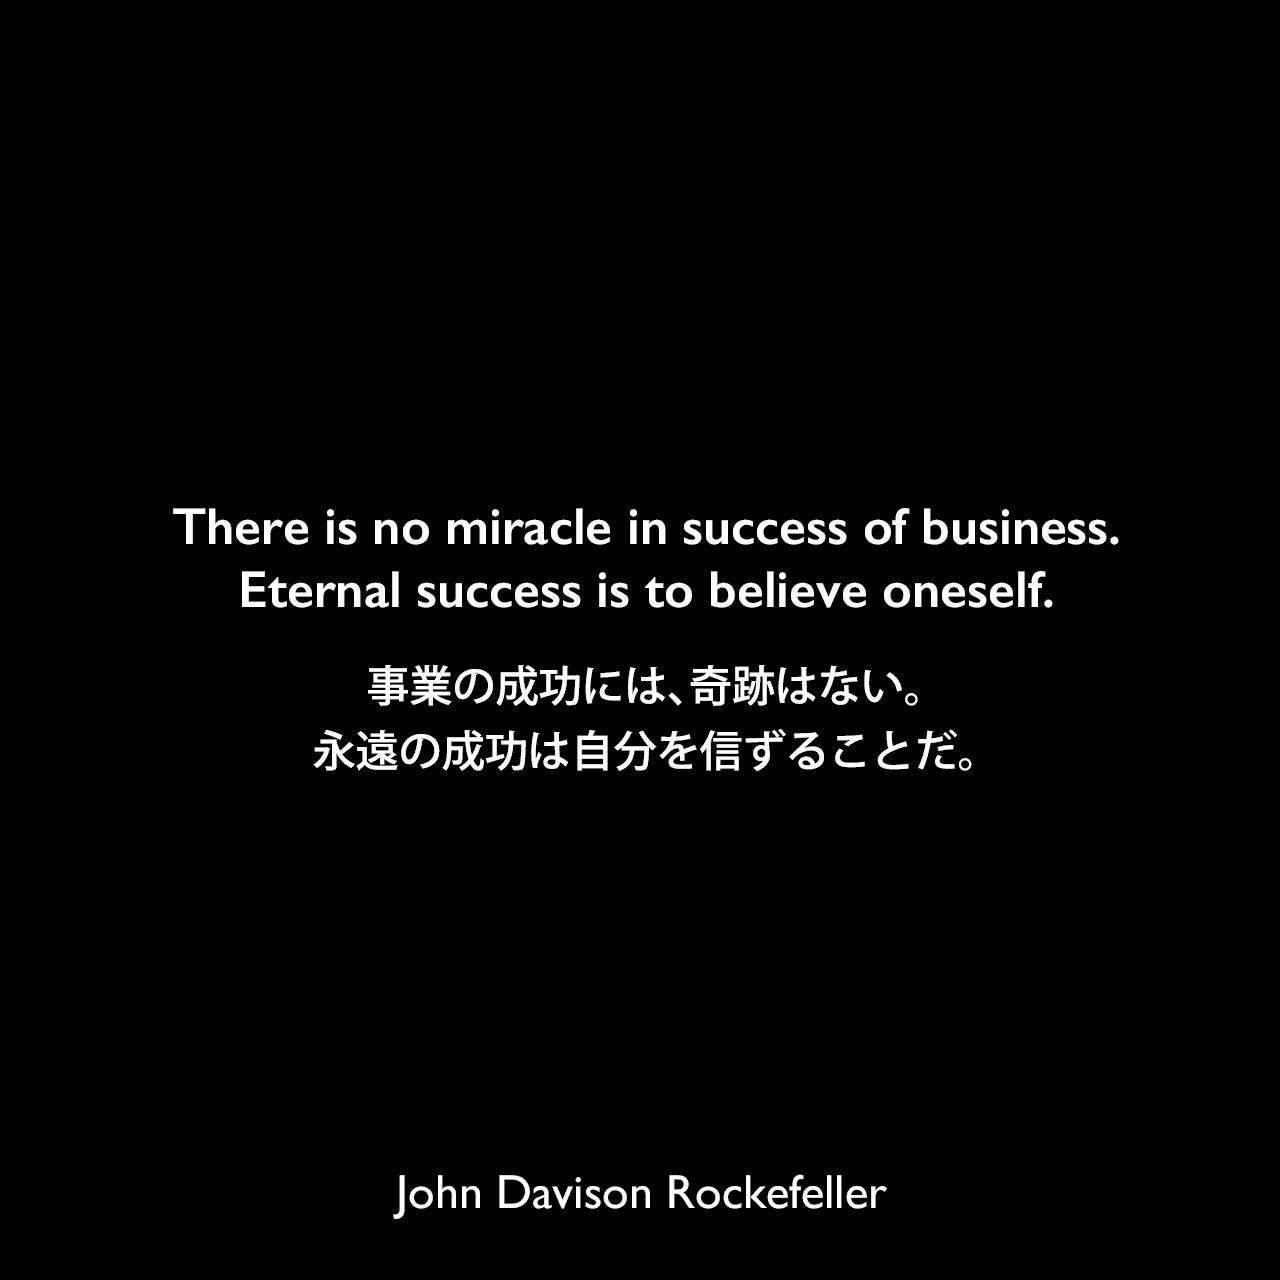 There is no miracle in success of business.Eternal success is to believe oneself.事業の成功には、奇跡はない。永遠の成功は自分を信ずることだ。John Davison Rockefeller